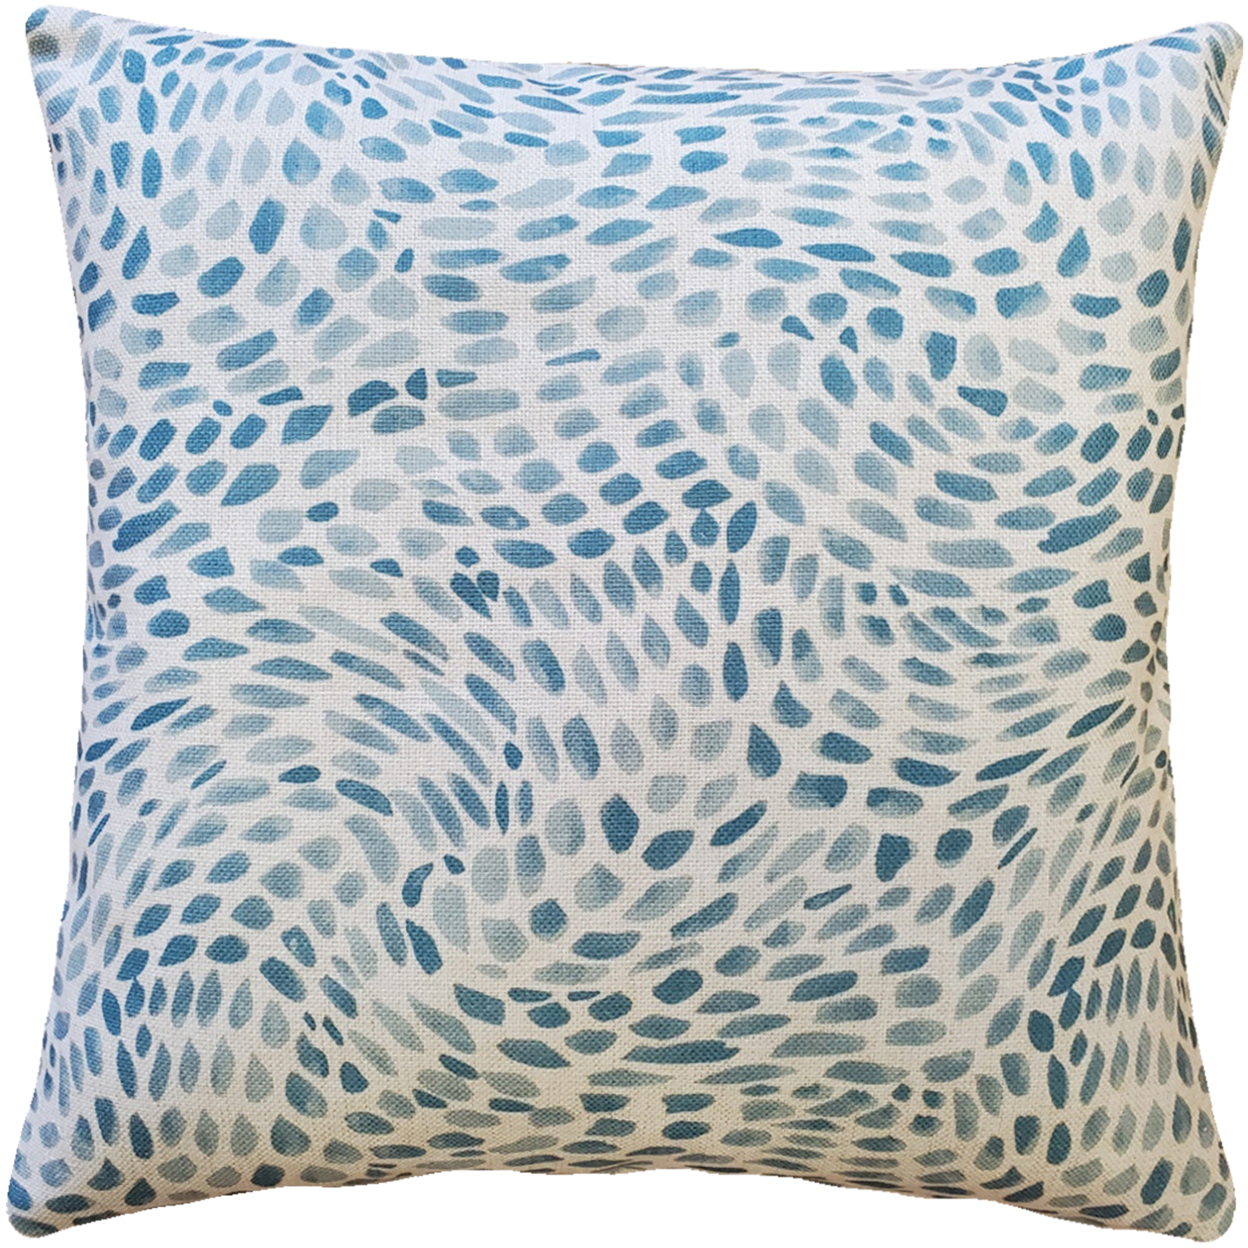 Matisse Dots Toile Blue Throw Pillow 19x19 Inches Square, Complete Pillow With Polyfill Pillow Insert